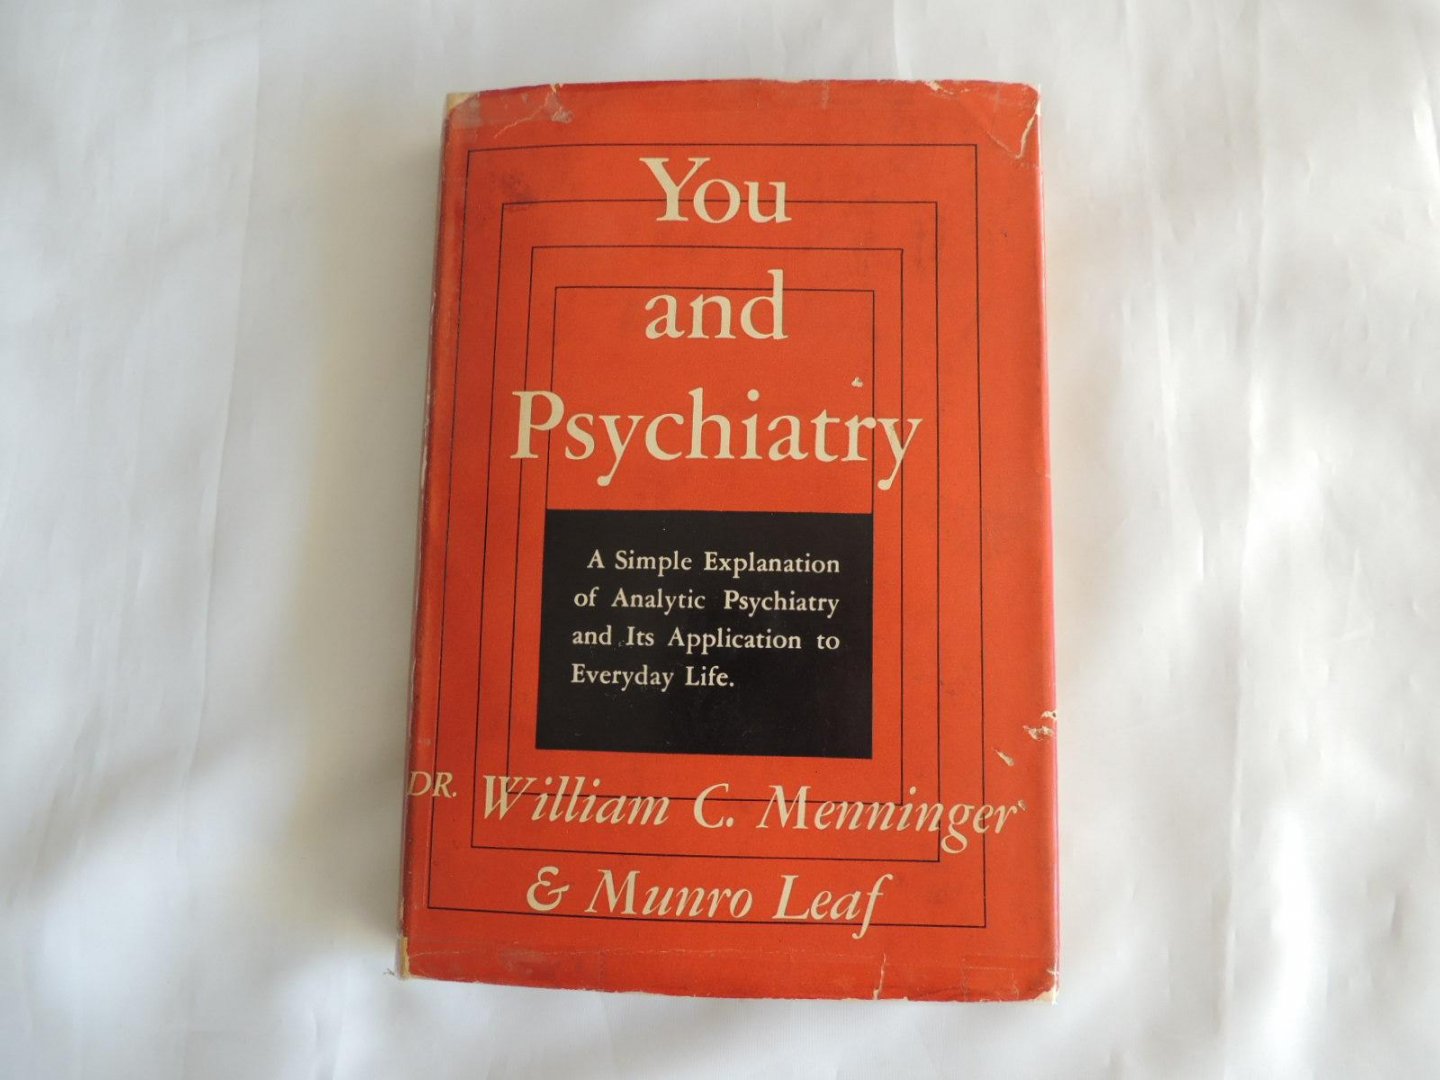 William Claire Menninger; Munro Leaf - You and psychiatry